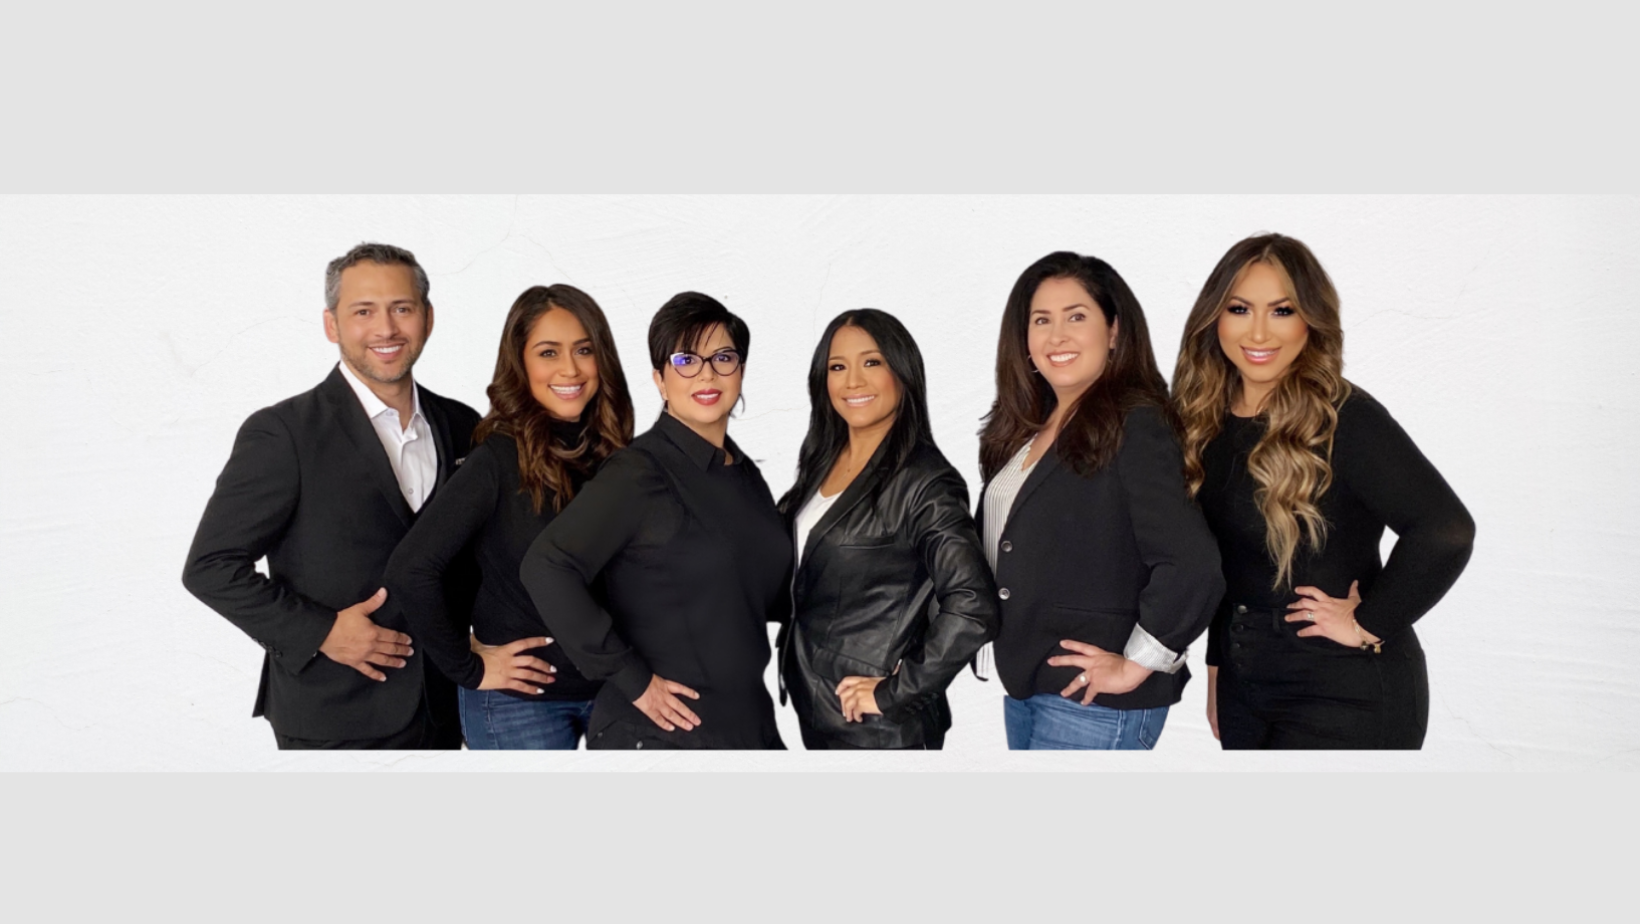 The Norma Morales Team